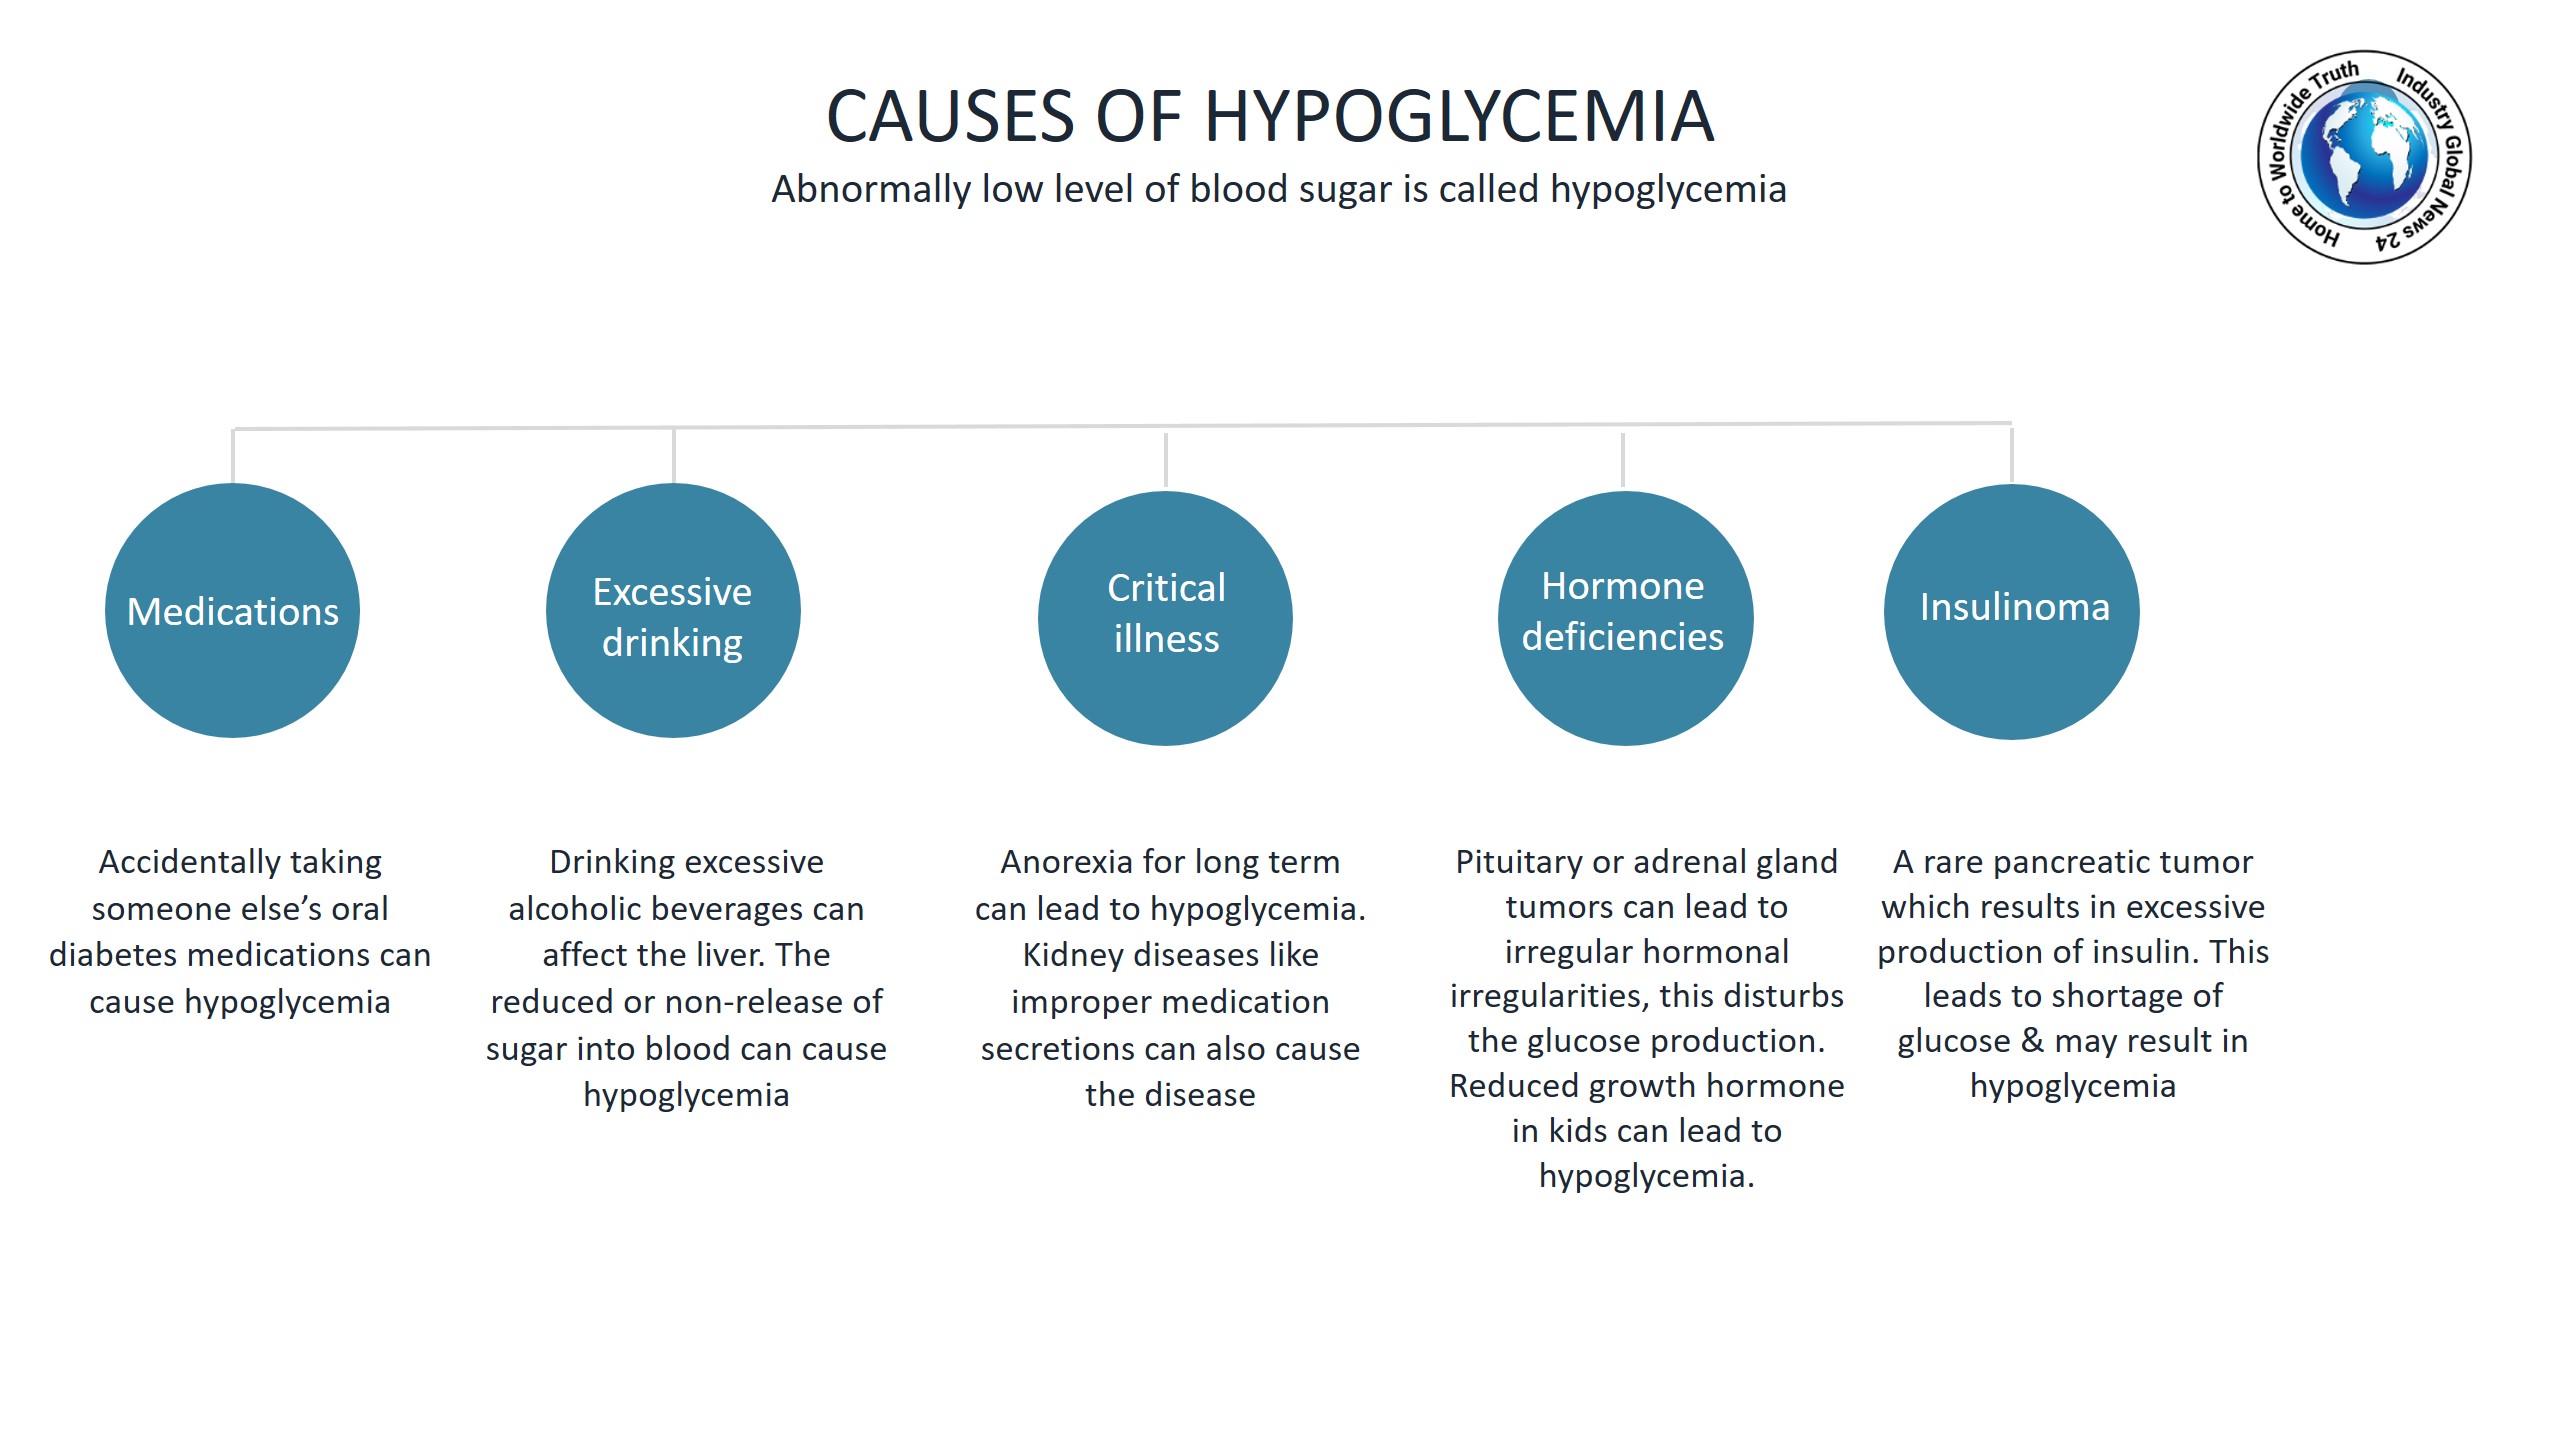 Causes of hypoglycemia